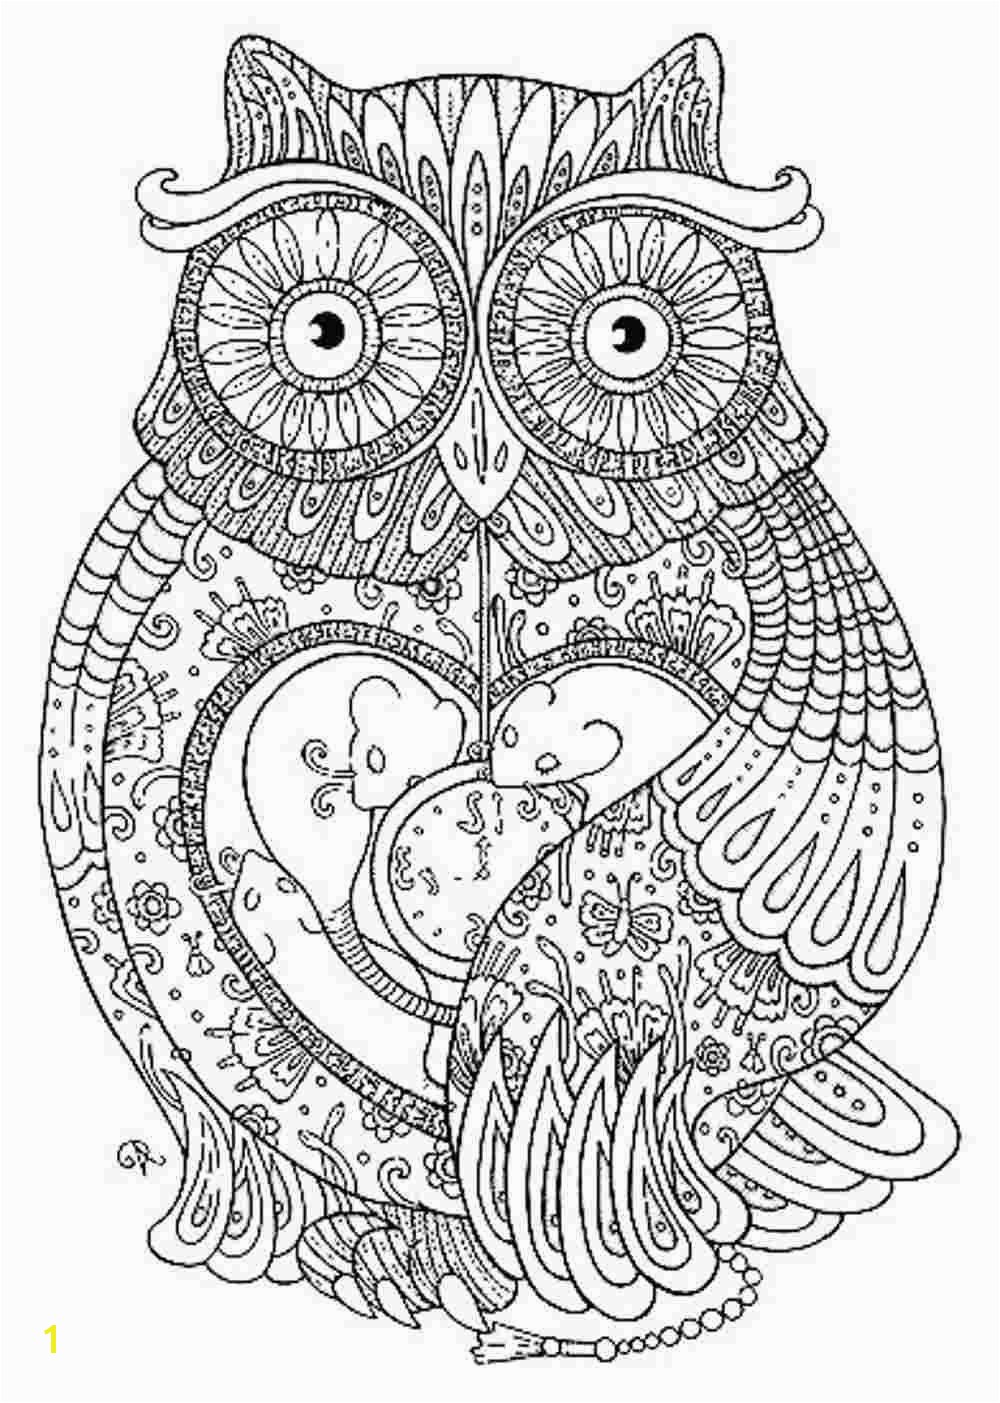 Owl Coloring Pages to Print for Adults Owl Coloring Pages for Adults Printable Kids Colouring Pages